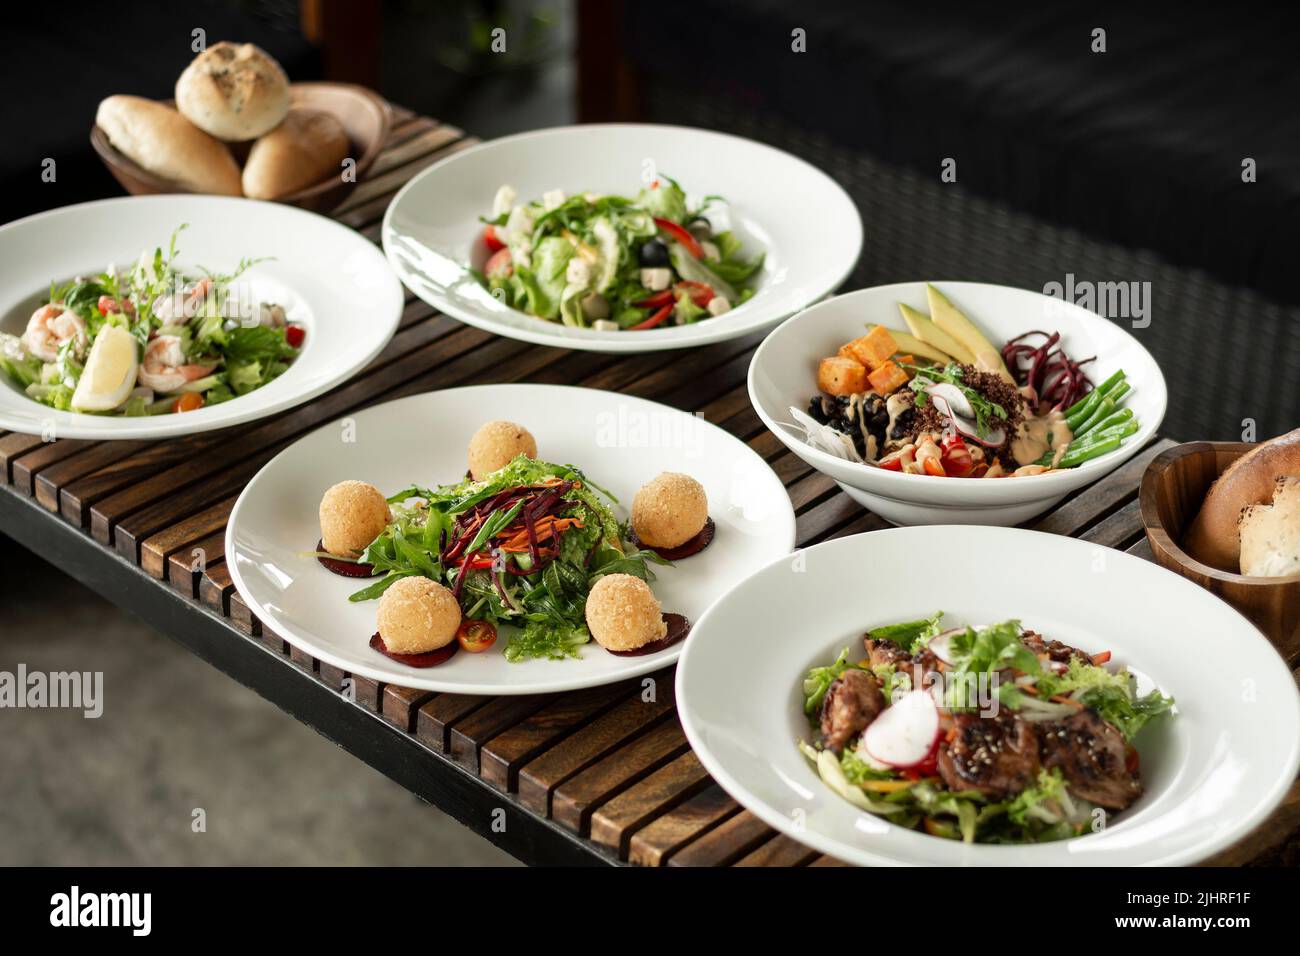 several different fresh mixed salad dishes on restaurant table Stock Photo